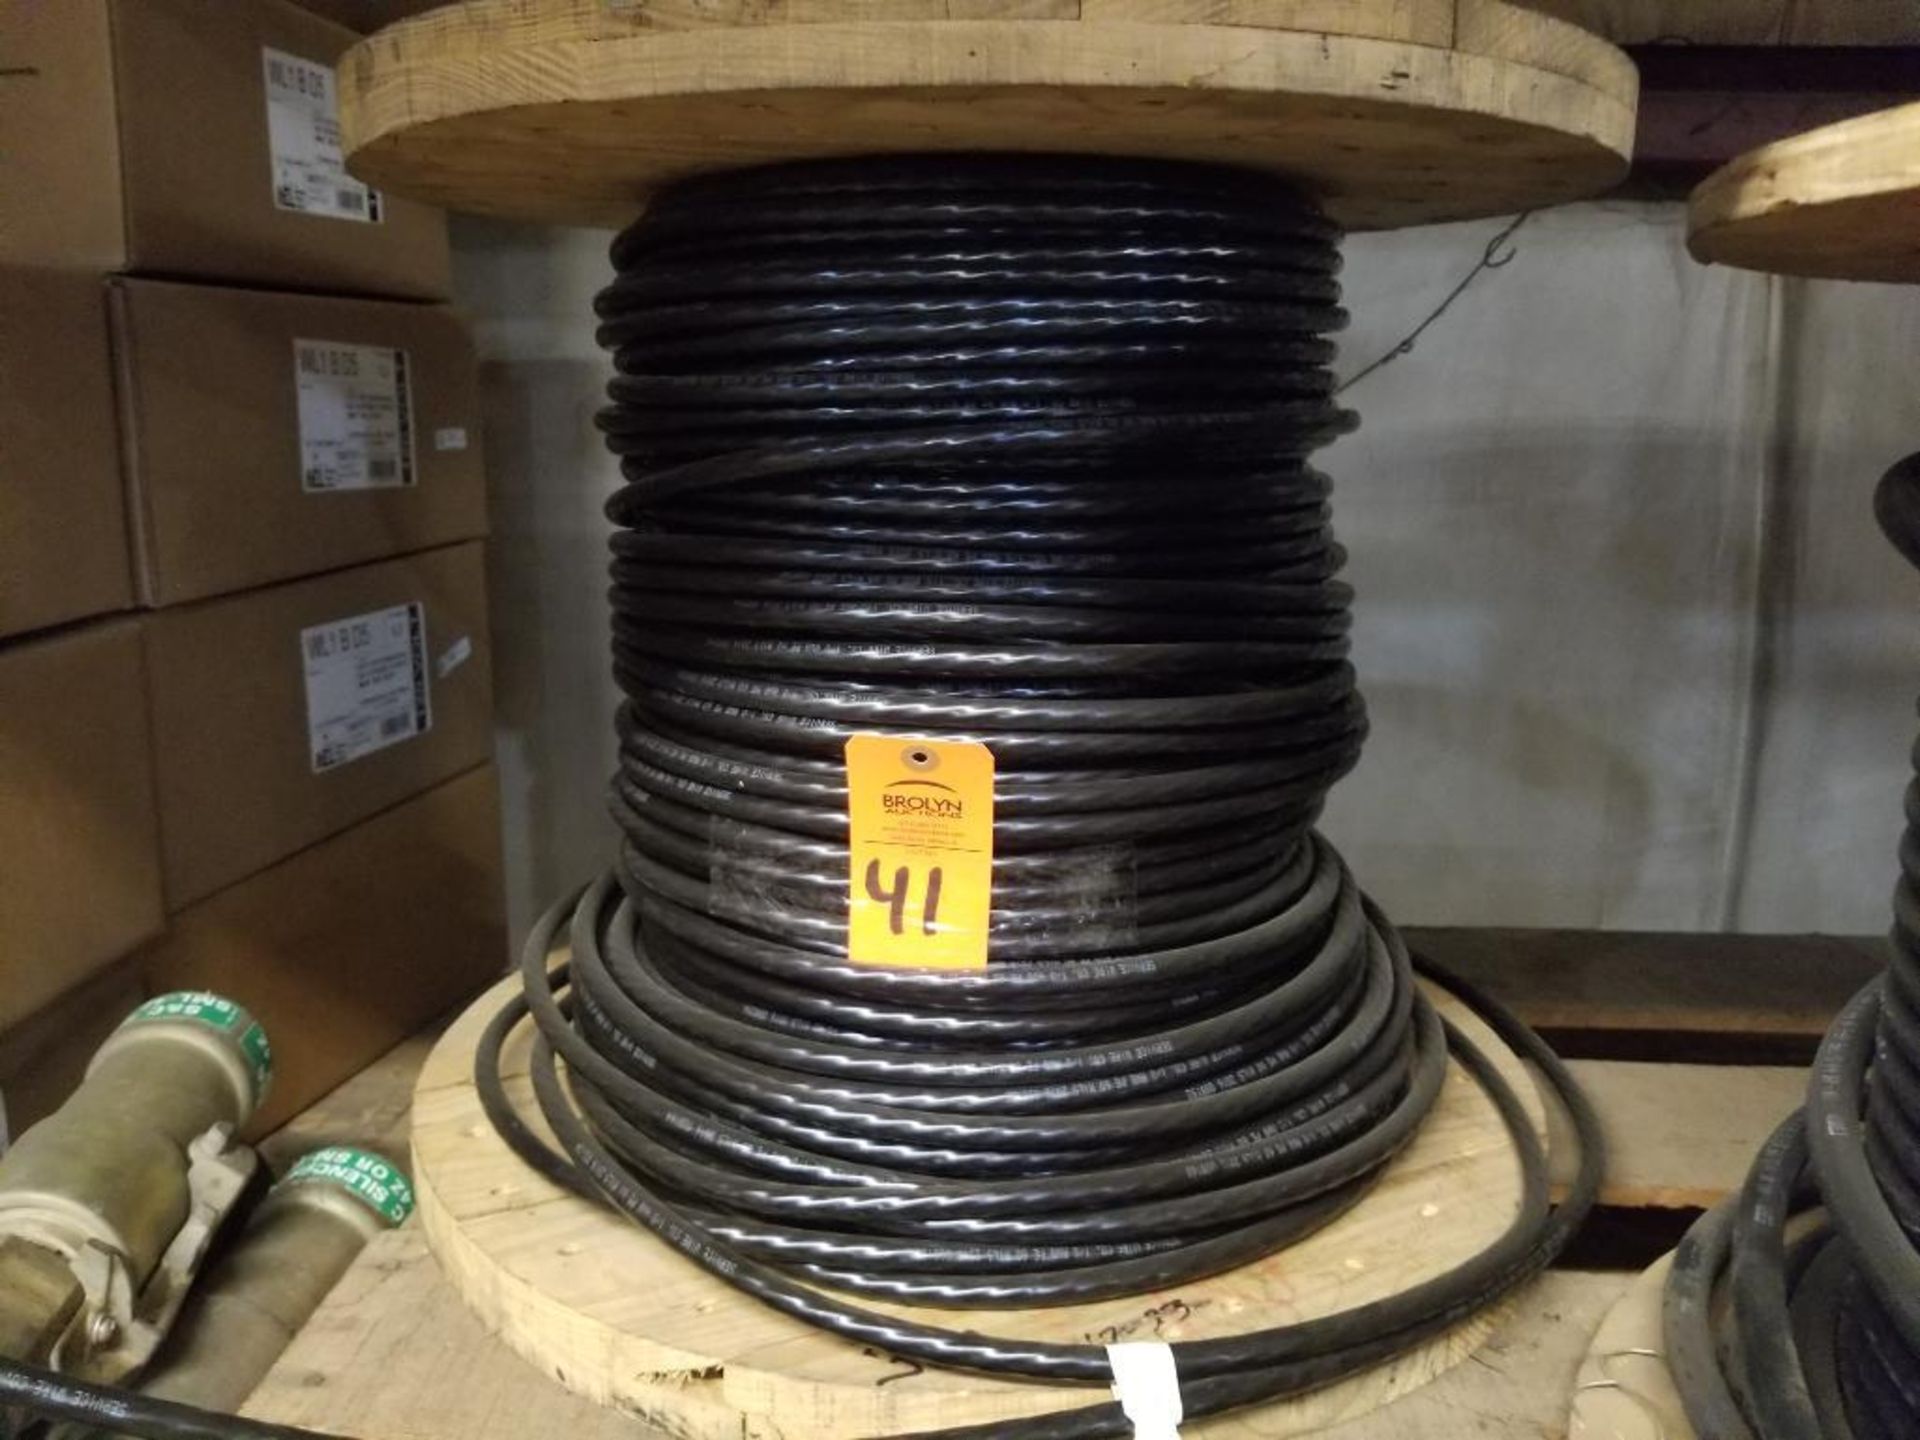 Spool of Southwire. 1/0 awg copper wire.